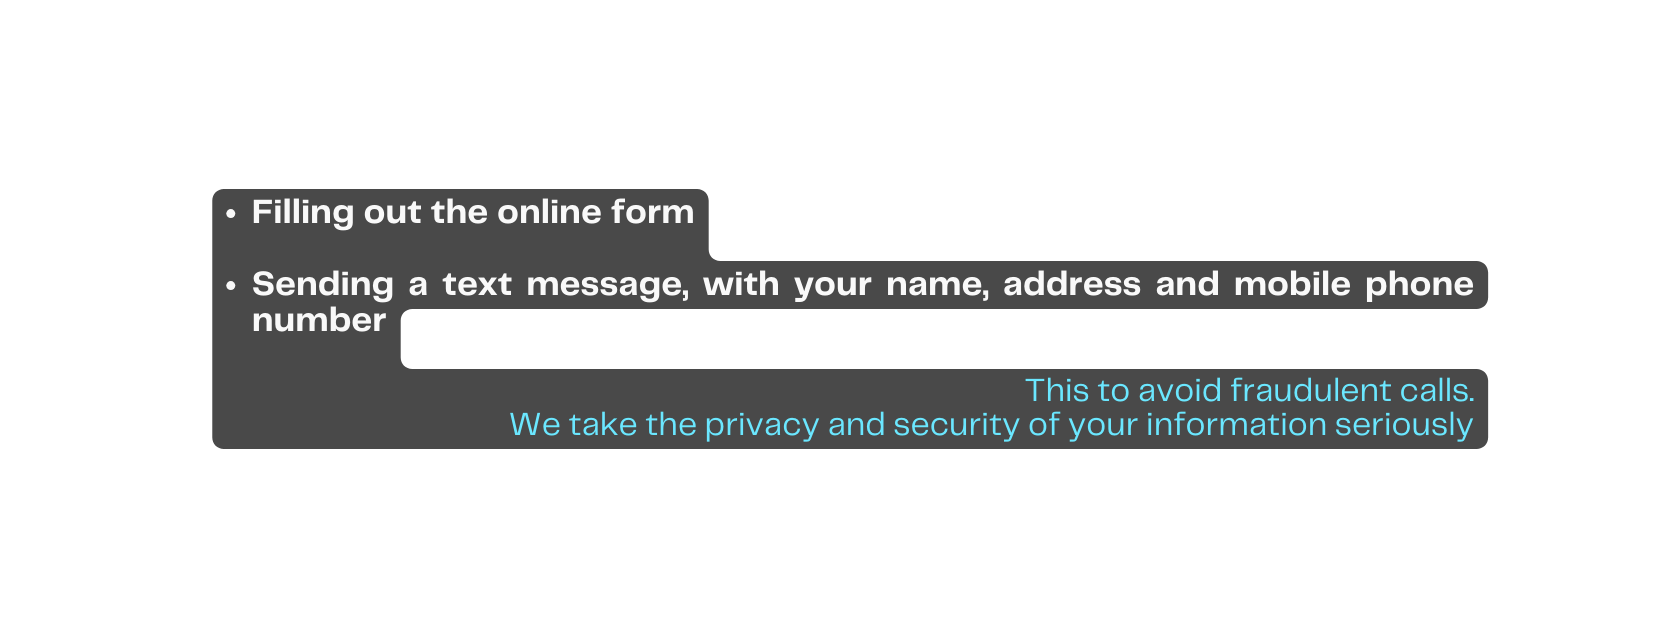 Filling out the online form Sending a text message with your name address and mobile phone number This to avoid fraudulent calls We take the privacy and security of your information seriously